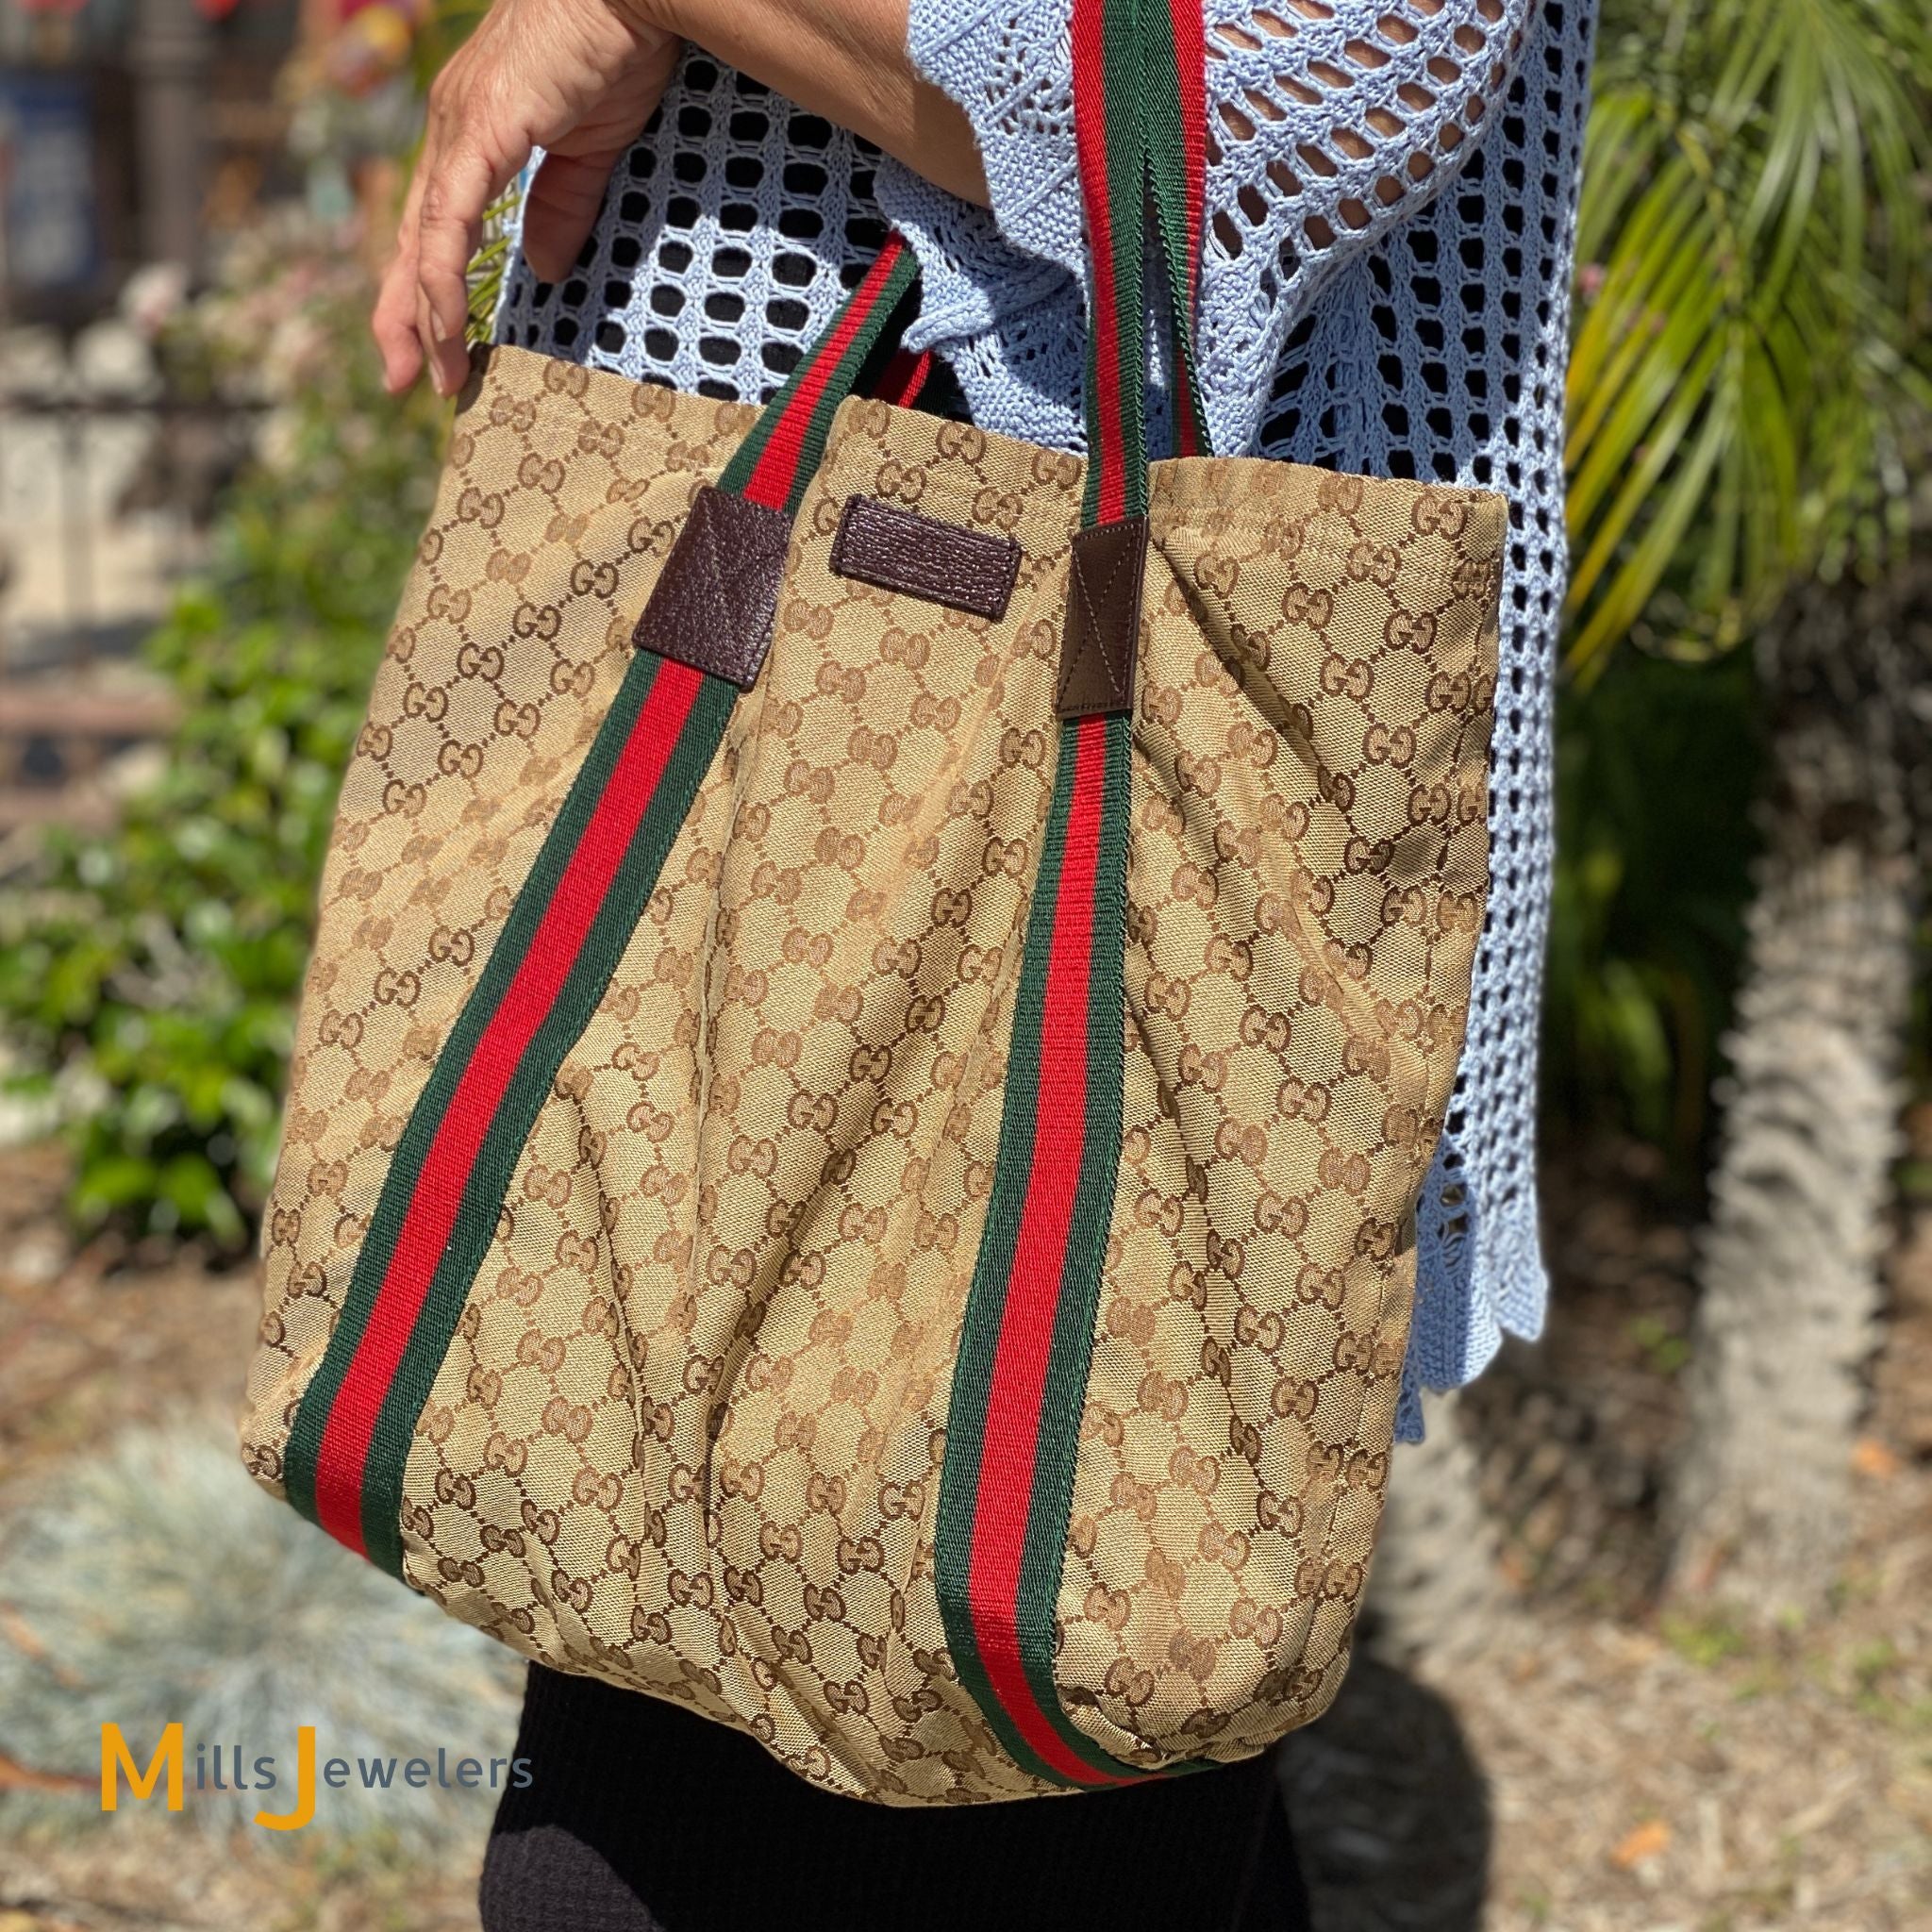 New In ♥️ Gucci Swing Tote To purchase visit our showroom or  atlantaluxurybags.com Disclaimer: Atlanta Luxury Bags is an independent…